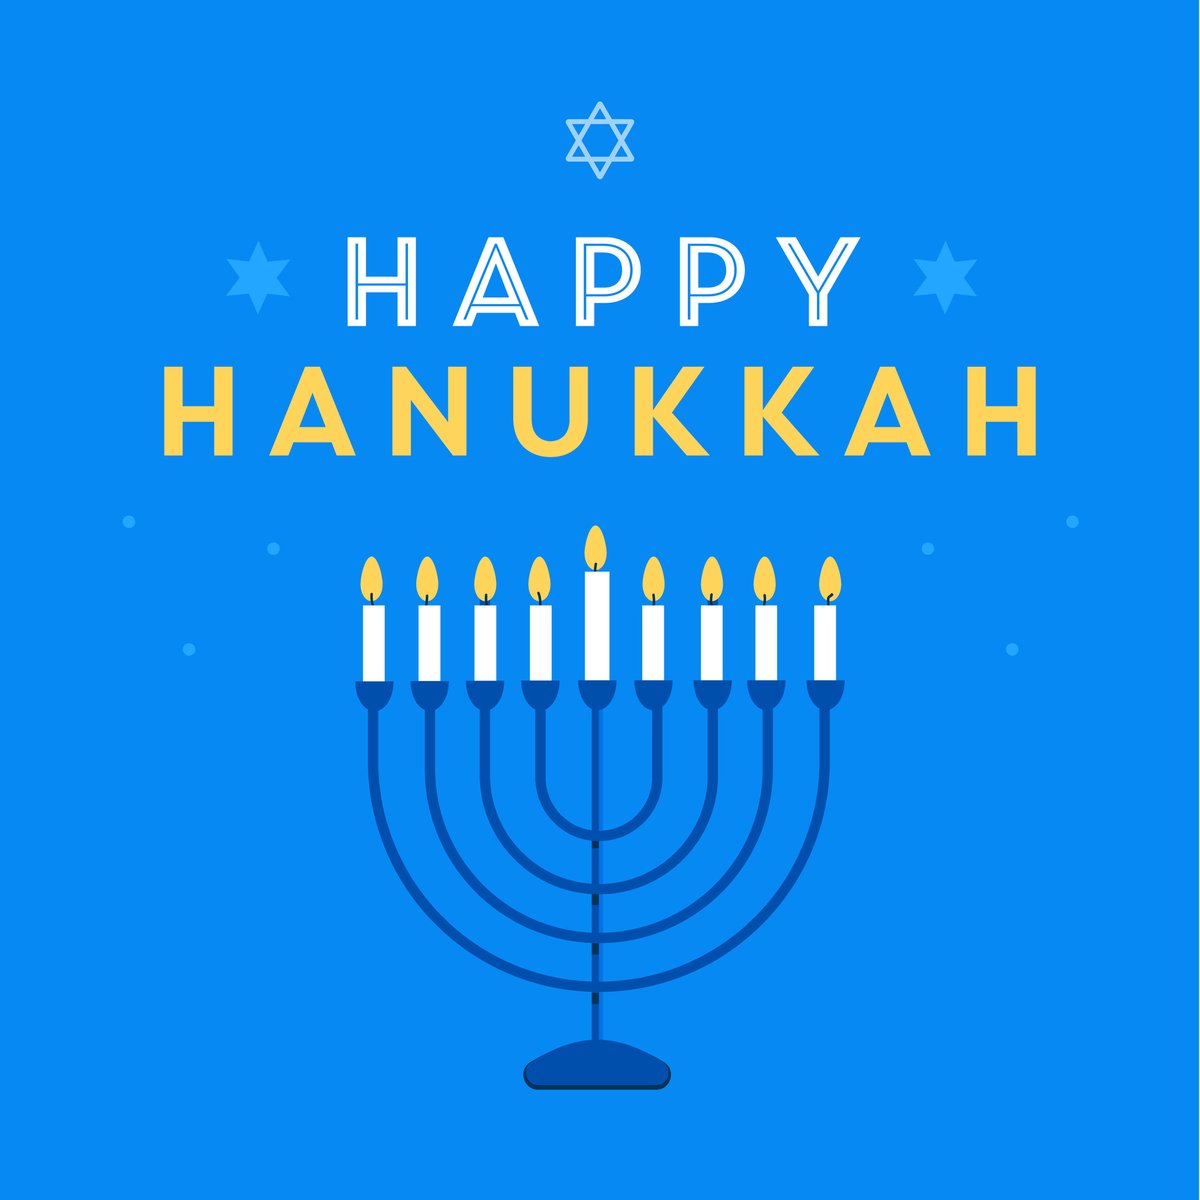 Happy Hanukkah! Wishing you a wonderful festival of lights filled with warmth, joy, and cherished moments with family and friends. #HanukkahCelebration #FestivalOfLights #HappyHolidays 🕎🕯️🌟